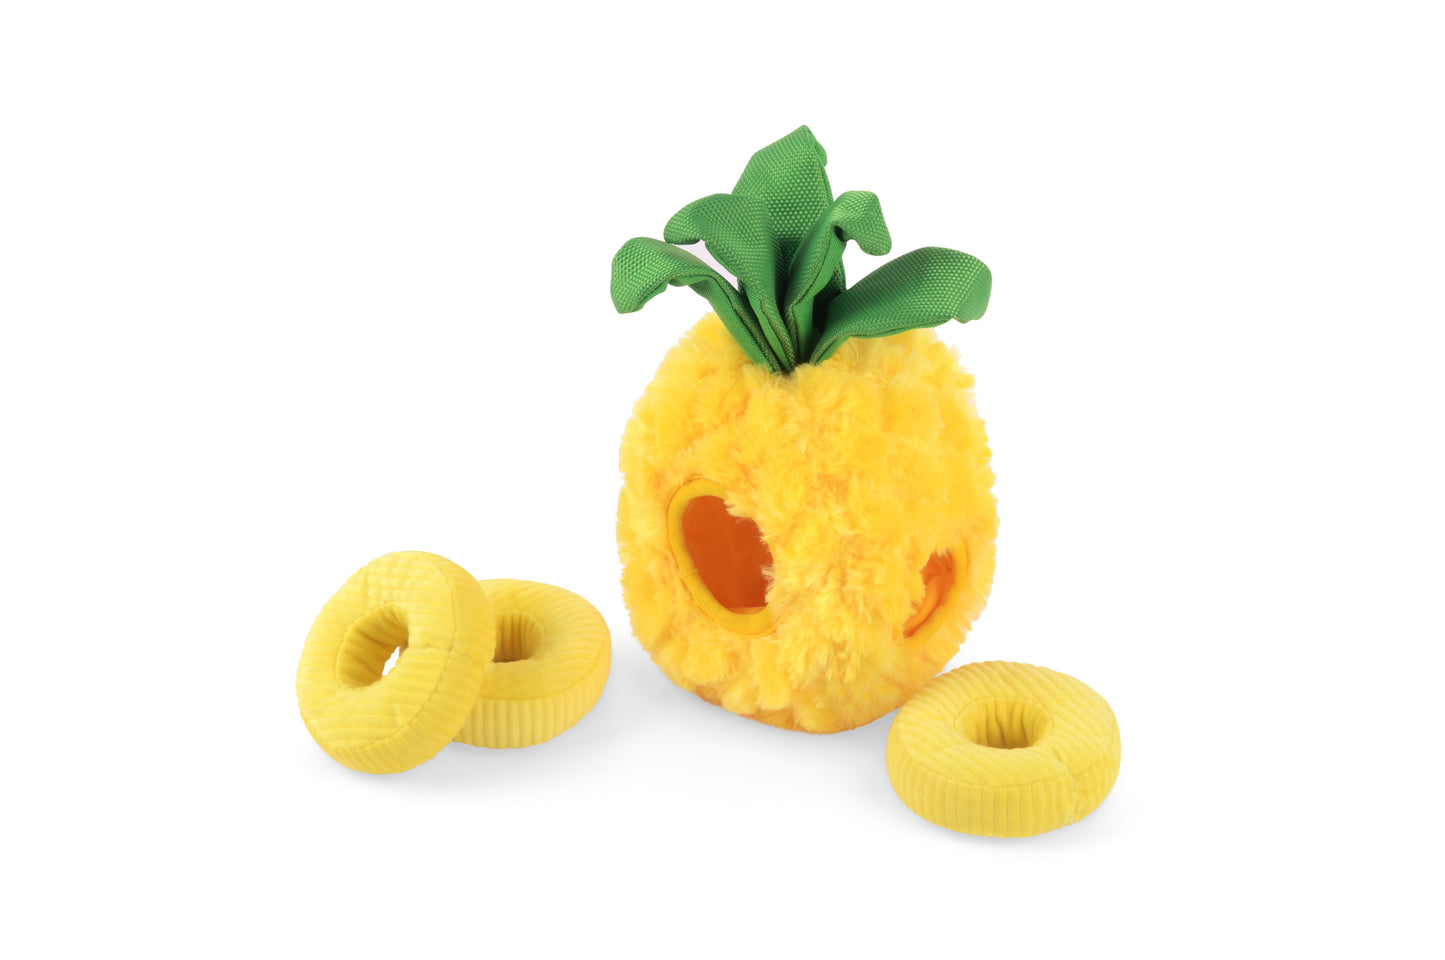 Pineapple Puzzle Toy